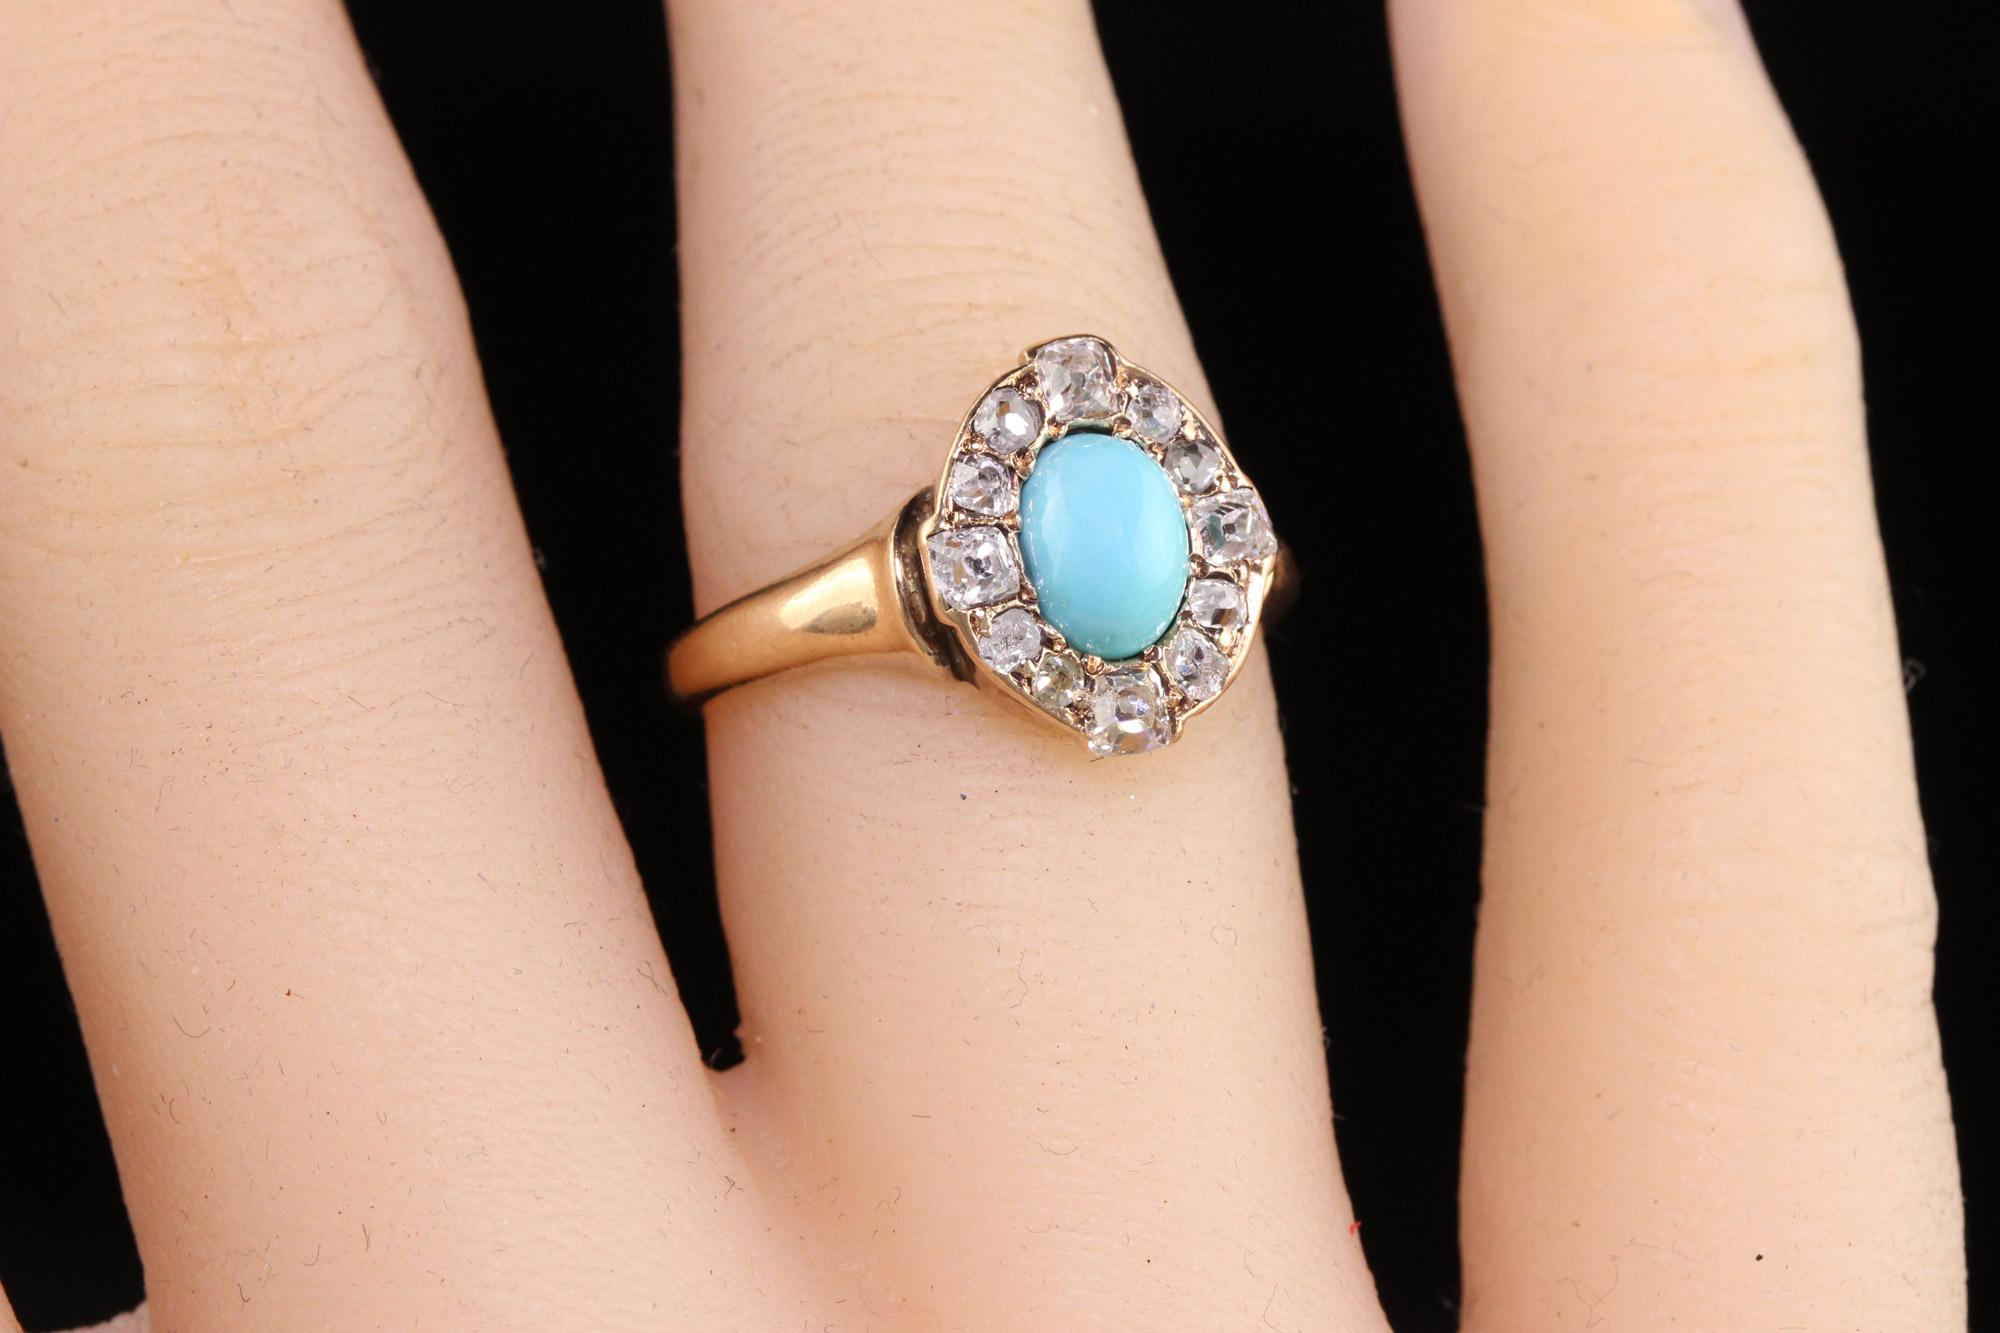 Women's Antique Victorian 14K Yellow Gold Cabochon Turquoise Old Mine Cut Diamond Ring